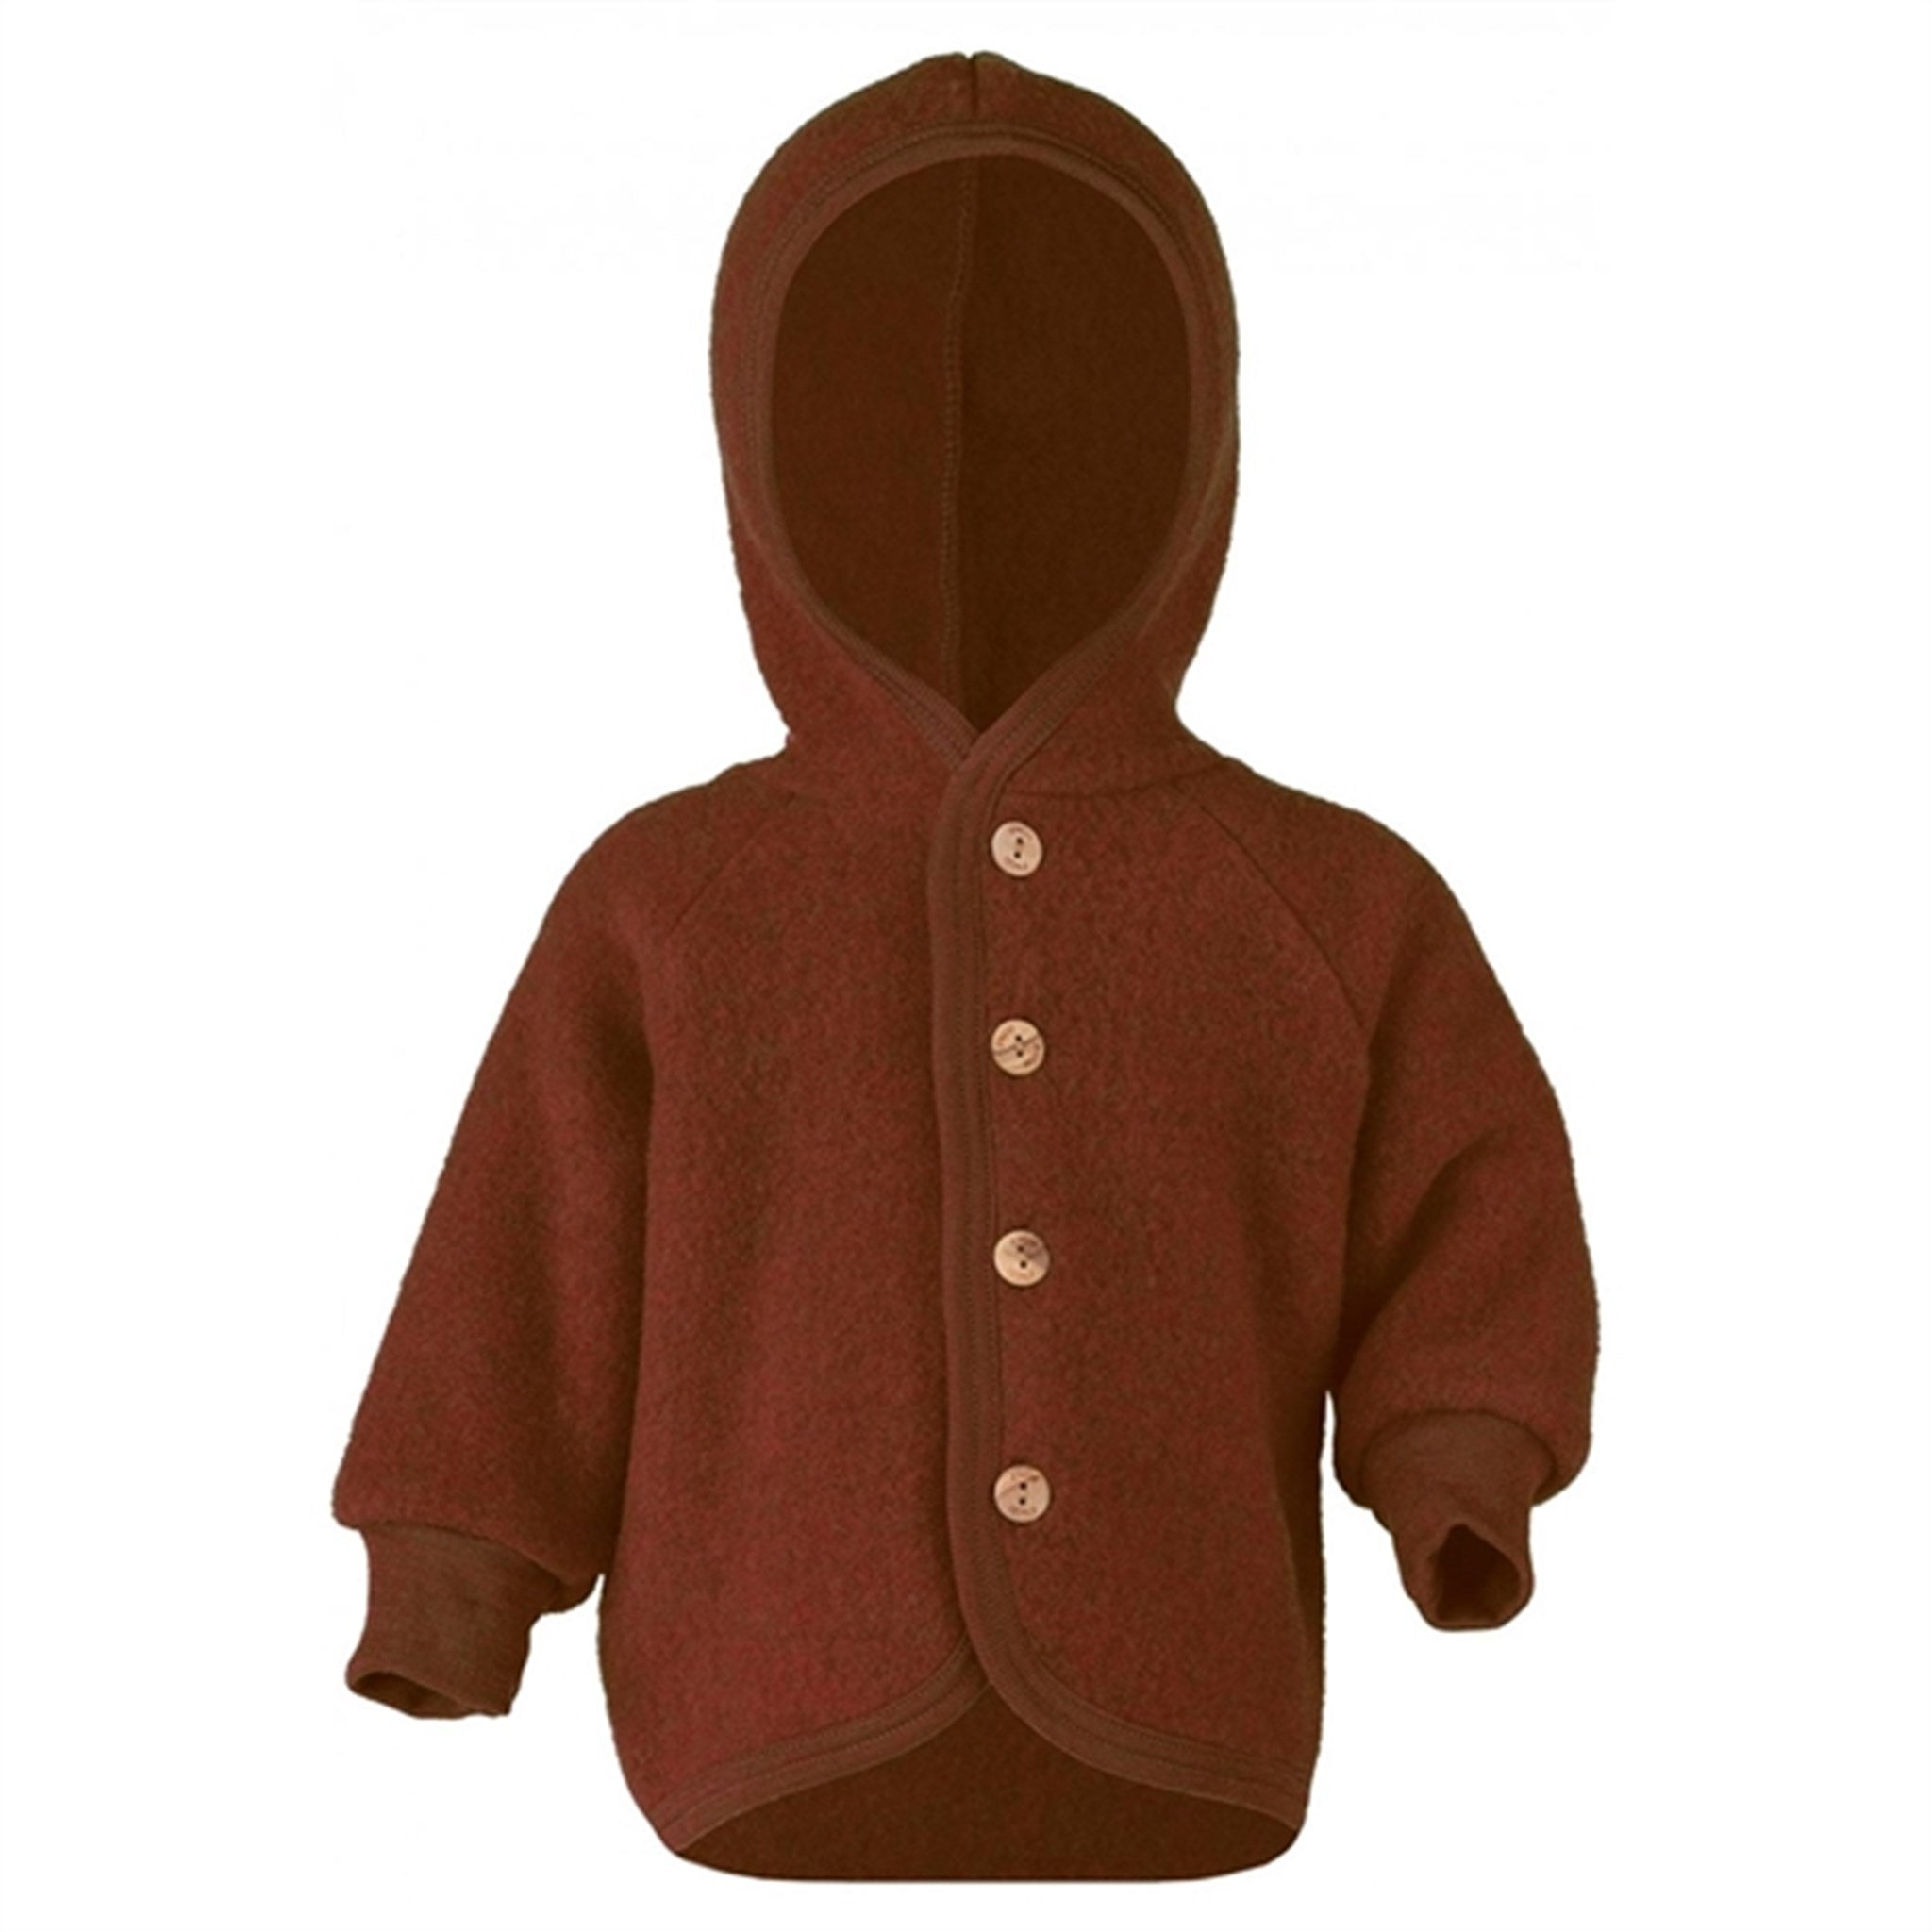 Engel Hooded Jacket with Wooden Buttons Cinnamon Mélange